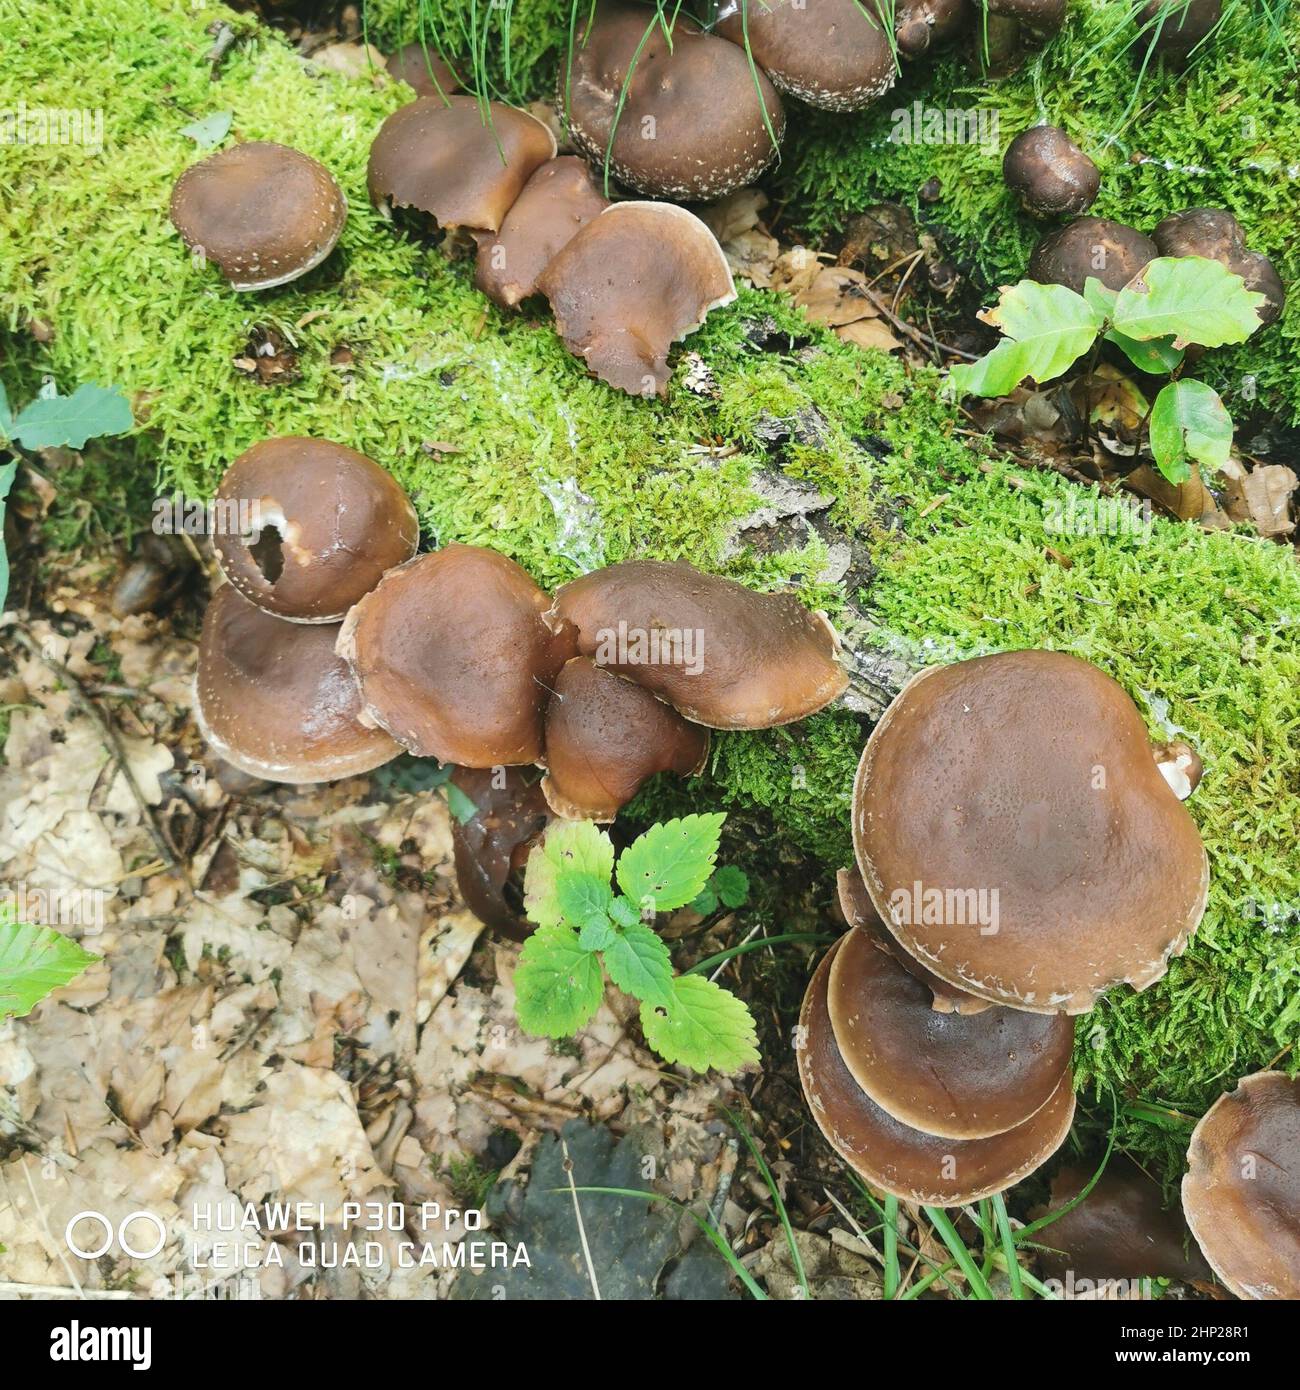 mushroom farming in agriculture, the cultivation of mushrooms and fungi Stock Photo